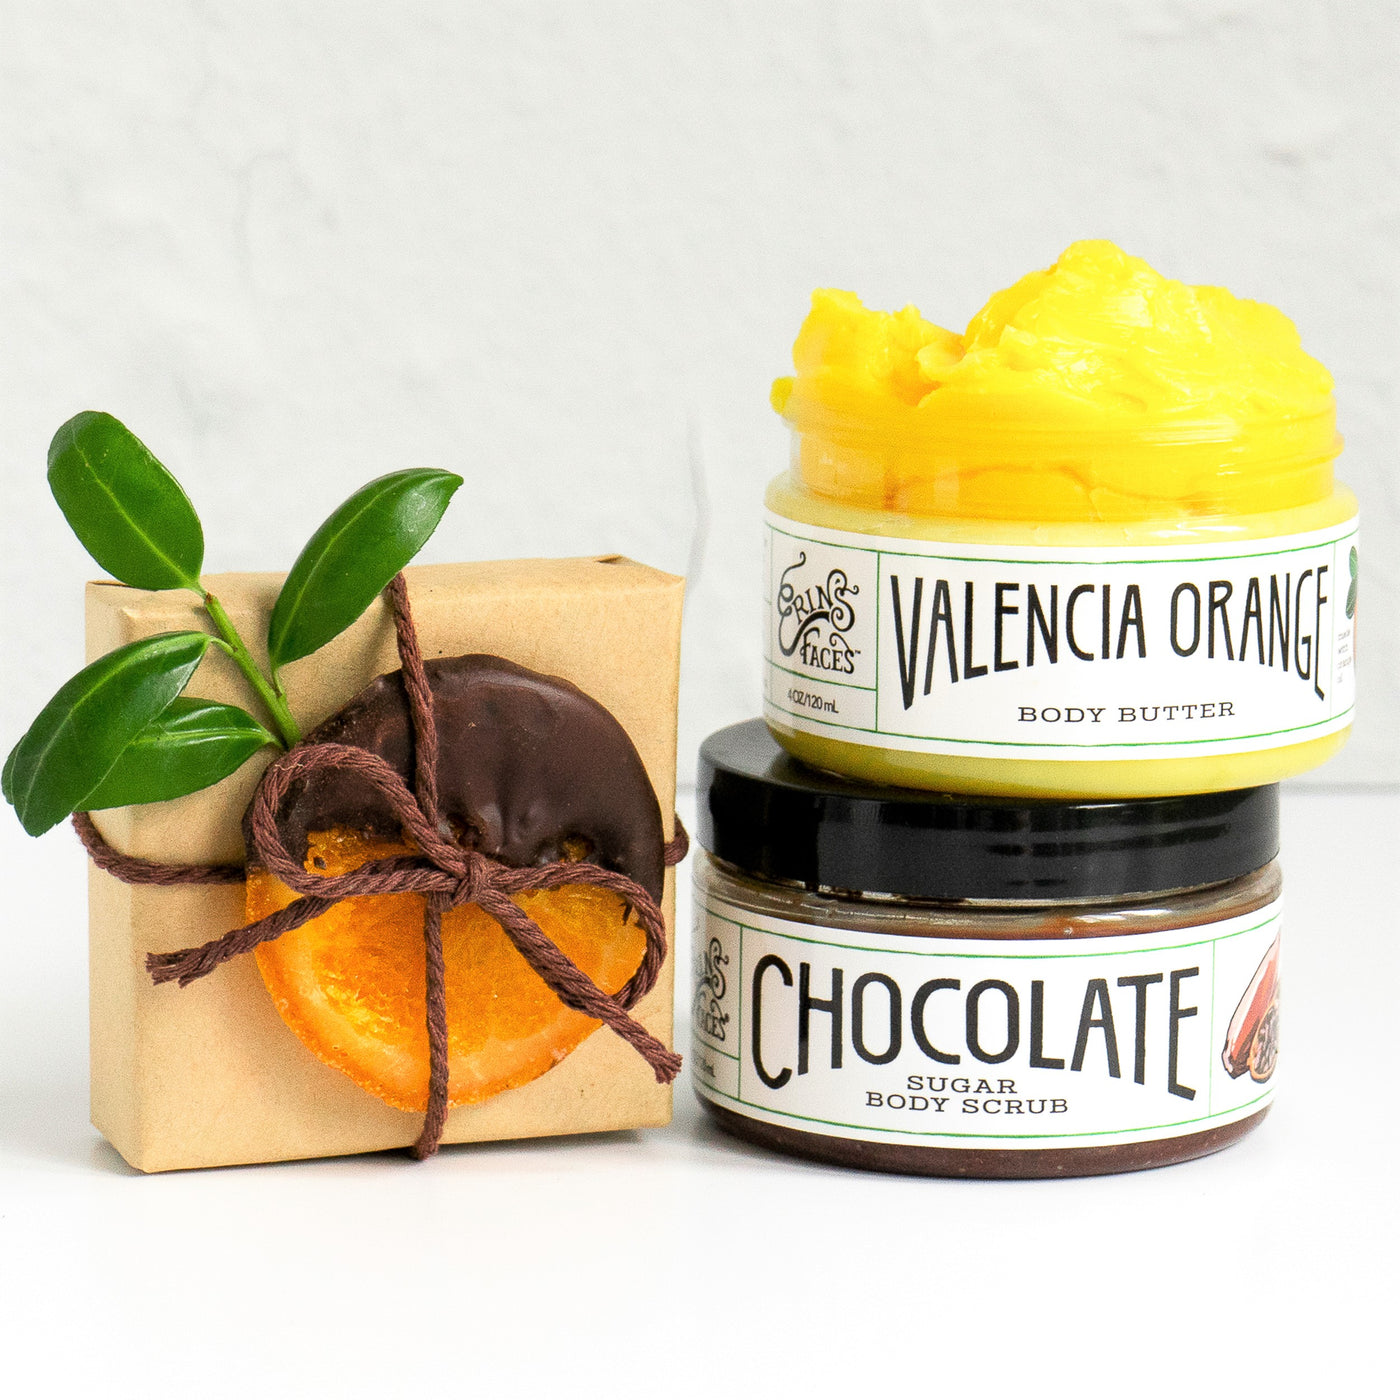 Valencia Orange Body Butter and Chocolate Sugar Body Scrub on white background next to brown paper gift wrapped box with brown string.  String holds a chocolate dipped dried orange slice and greenery